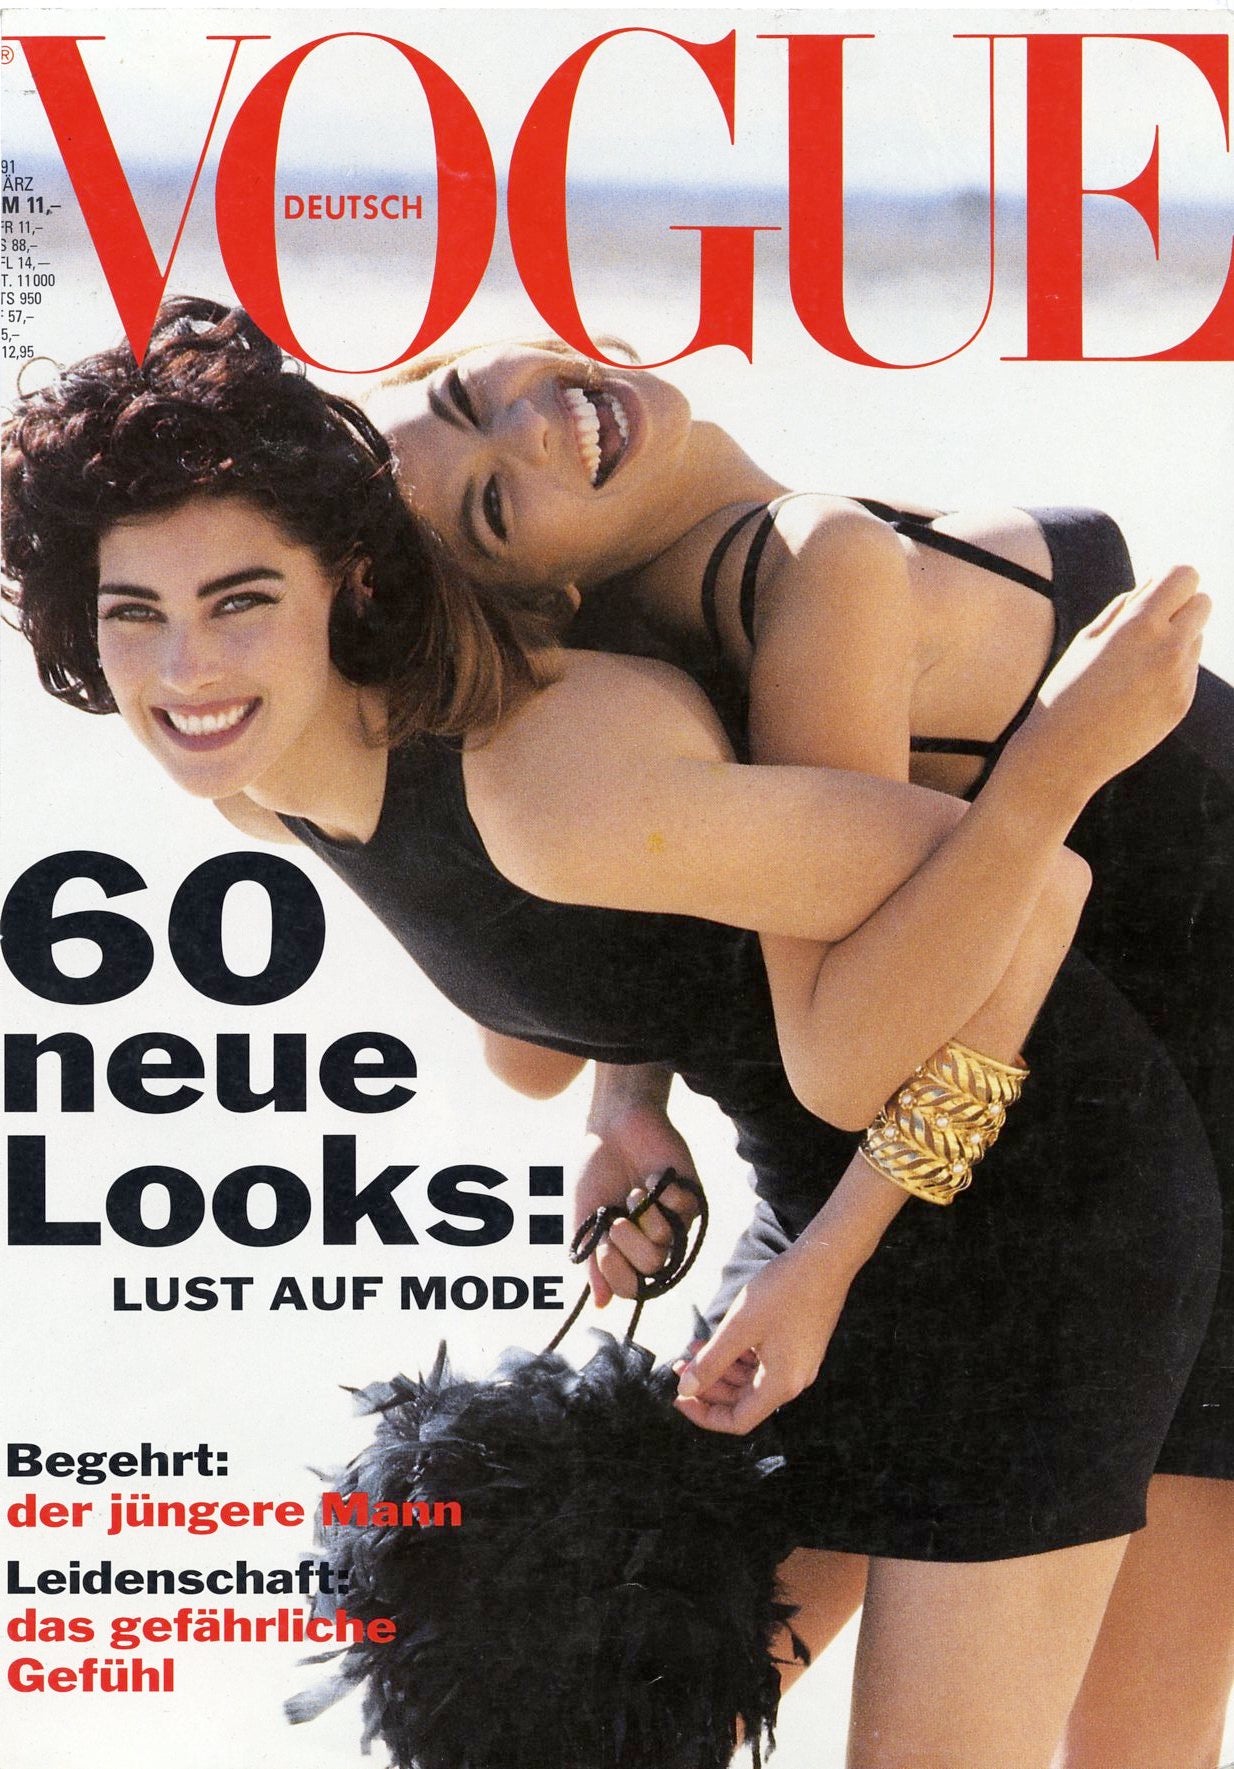 The feather bag - Vogue Germany March 1991